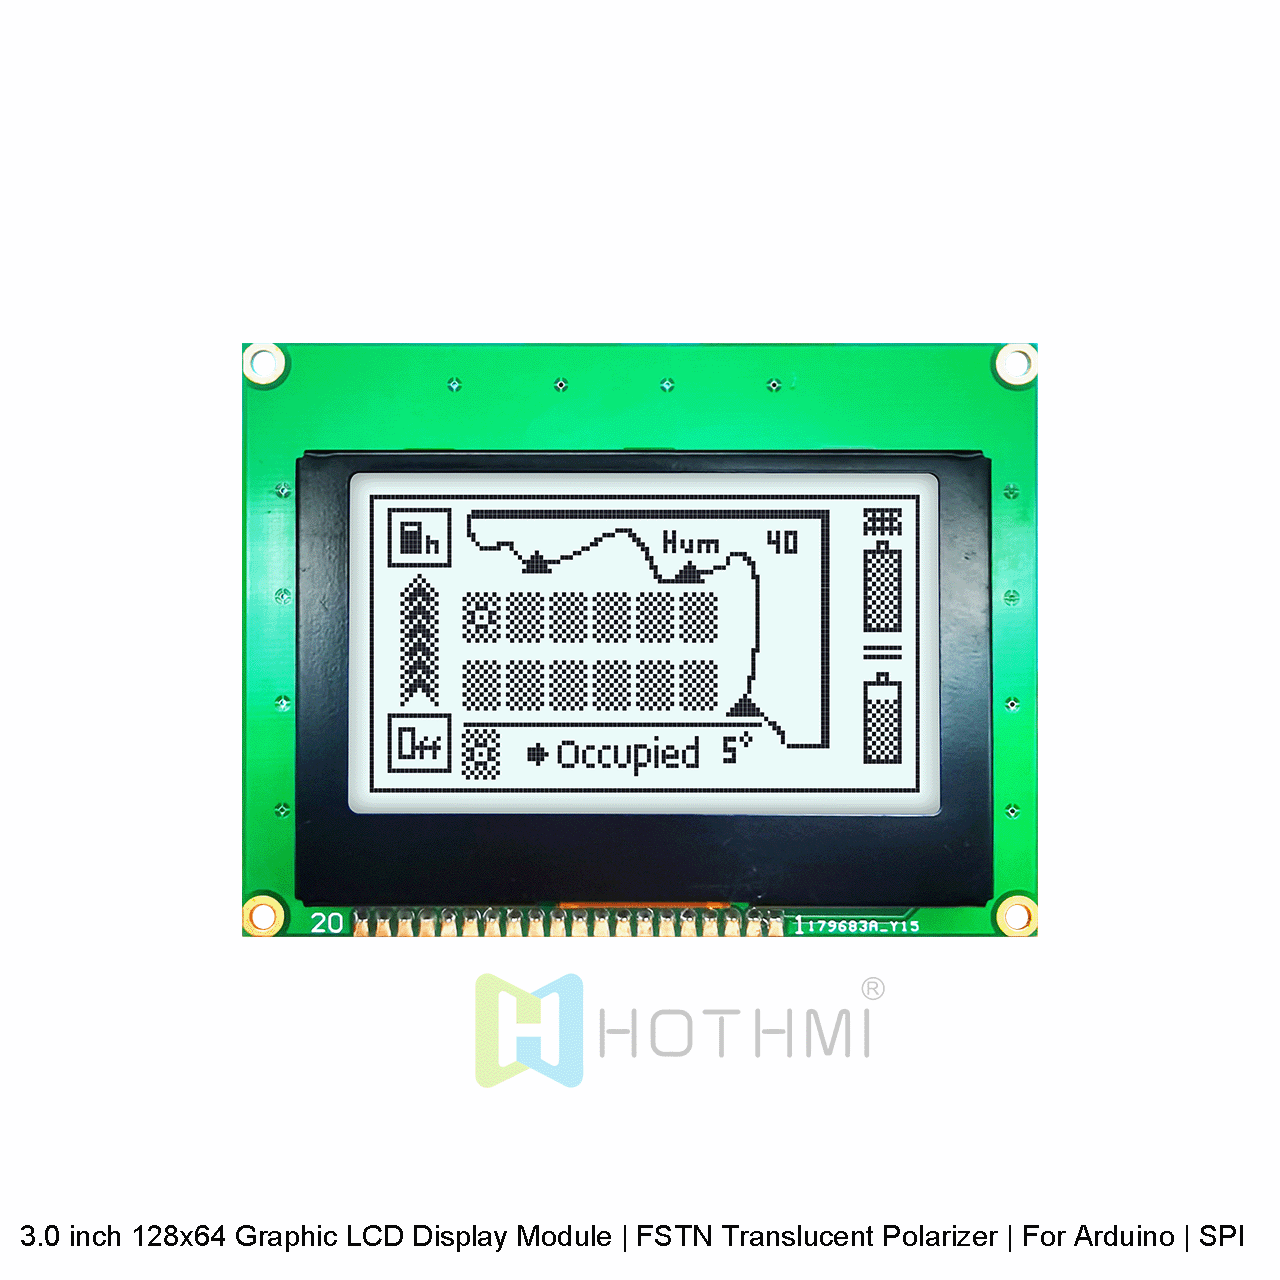 3.0 inch 128x64 Graphic LCD Display Module | FSTN Translucent Polarizer | For Arduino | SPI Interface | Gray Text on White Background